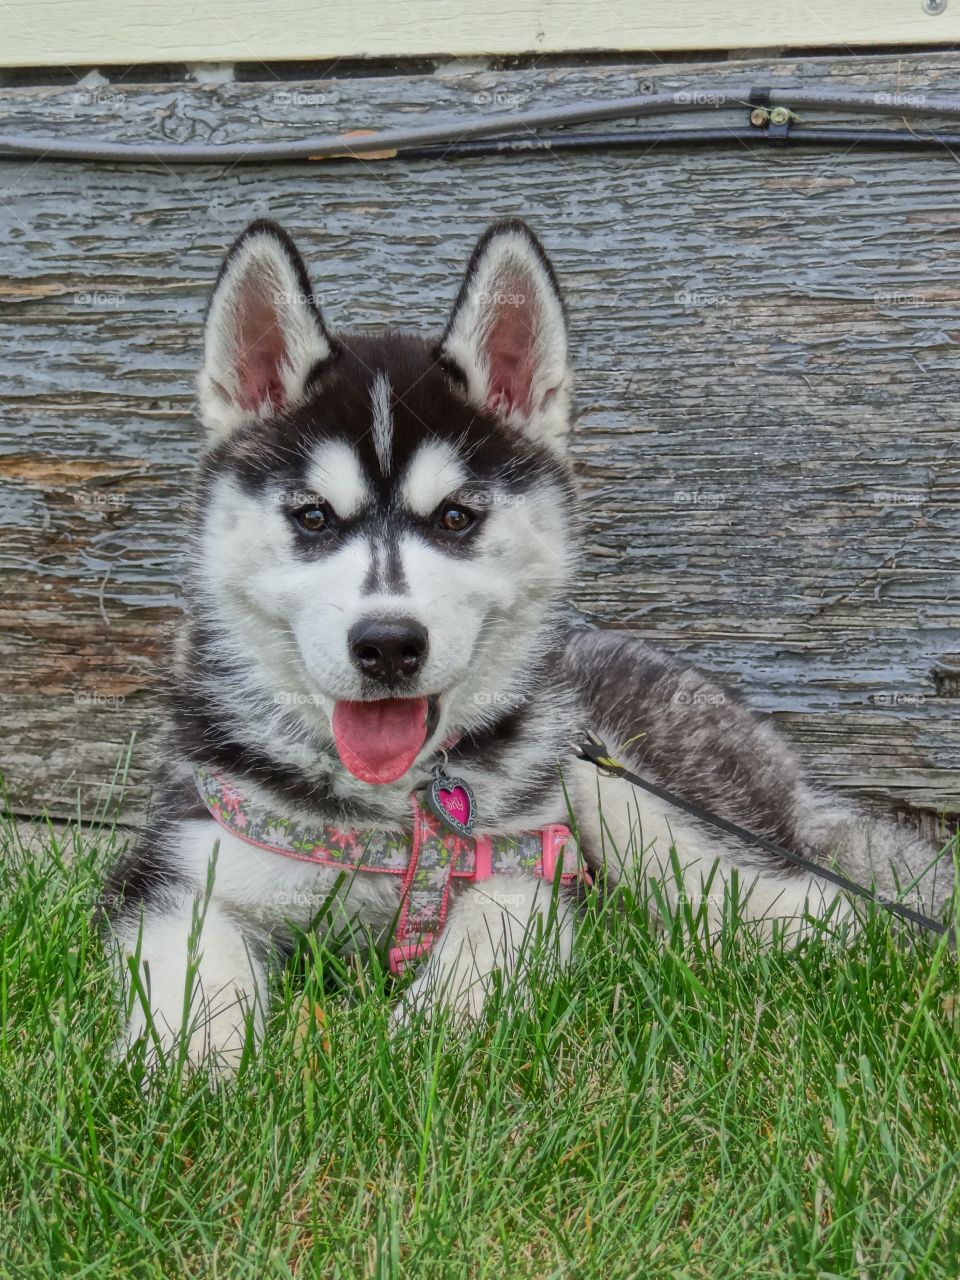 Siberian husky puppy pretty in pink. my grandfurbaby- Sky. A sweet fluffy Siberian husky puppy only 3 months old.